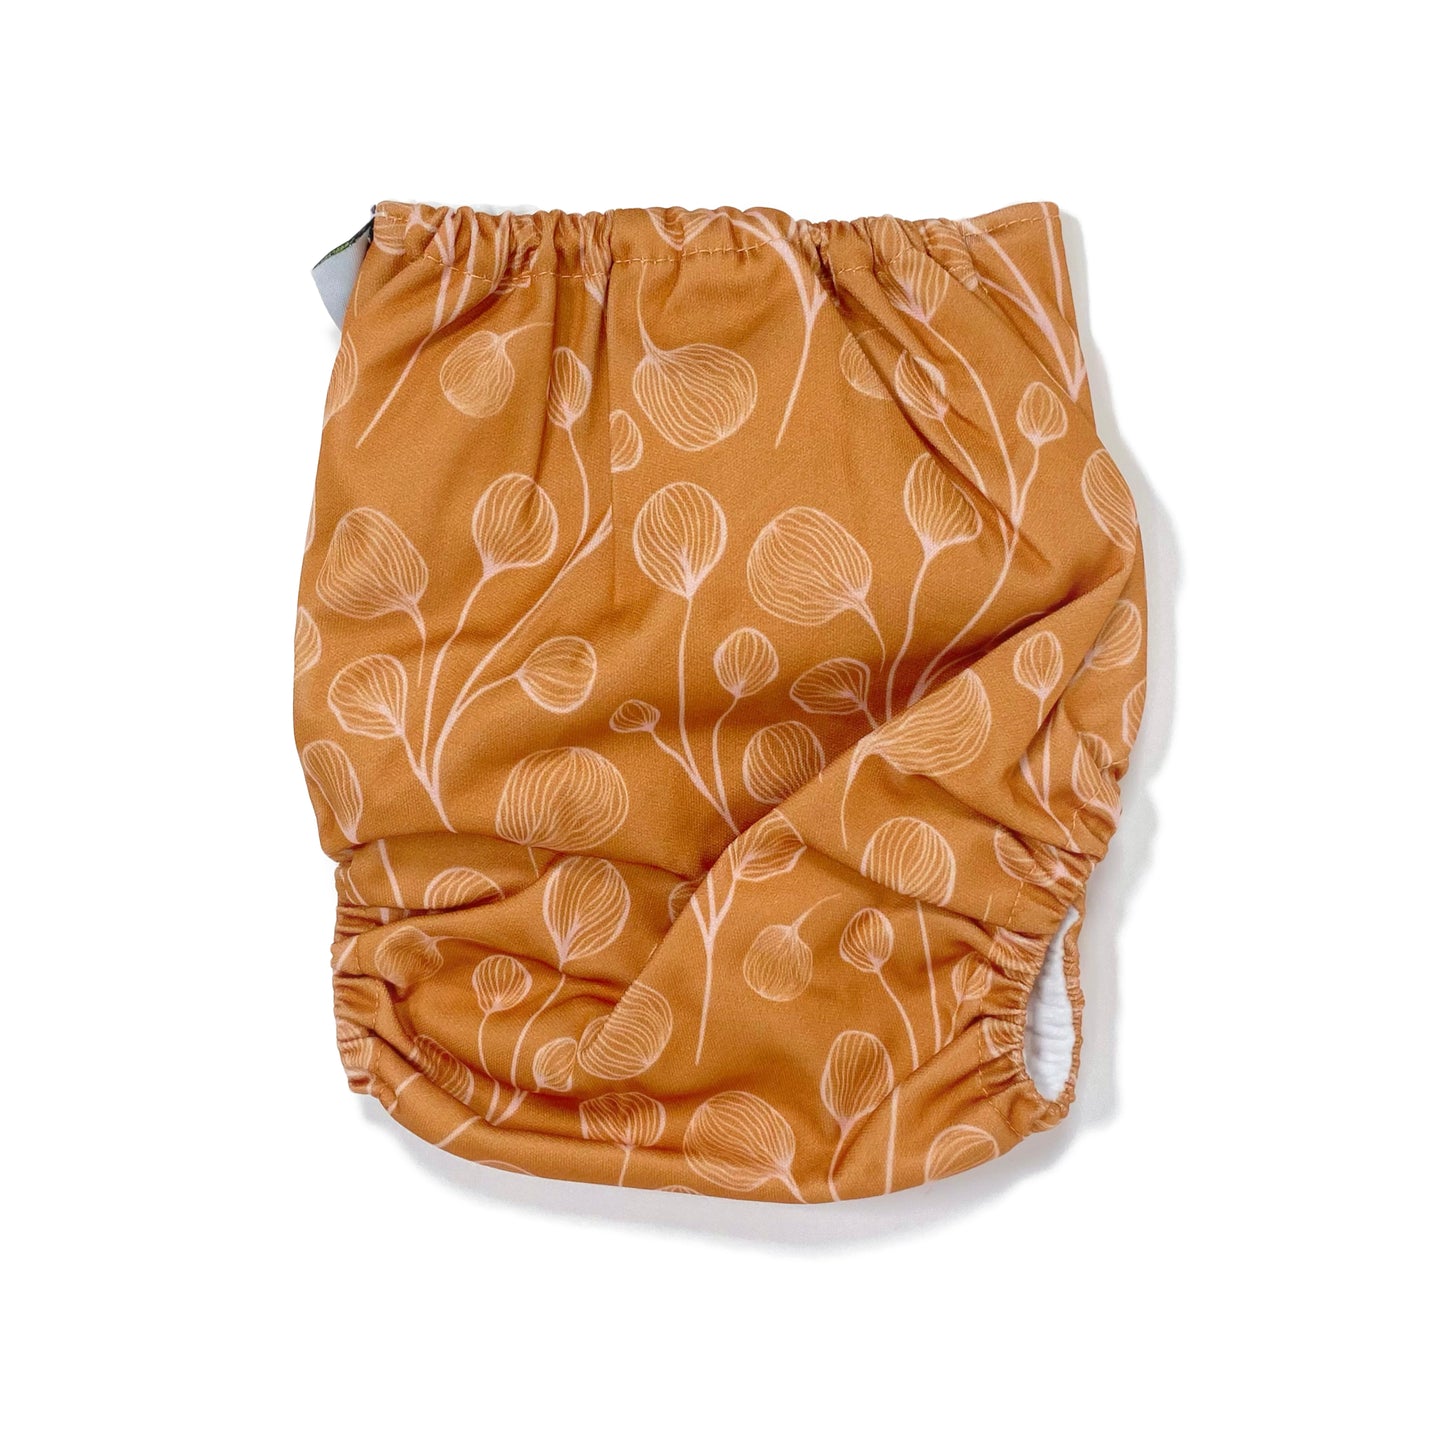 An adjustable reusable nappy for babies and toddlers, featuring a floral copper design, with floral images on a copper background. View shows the back of the nappy.